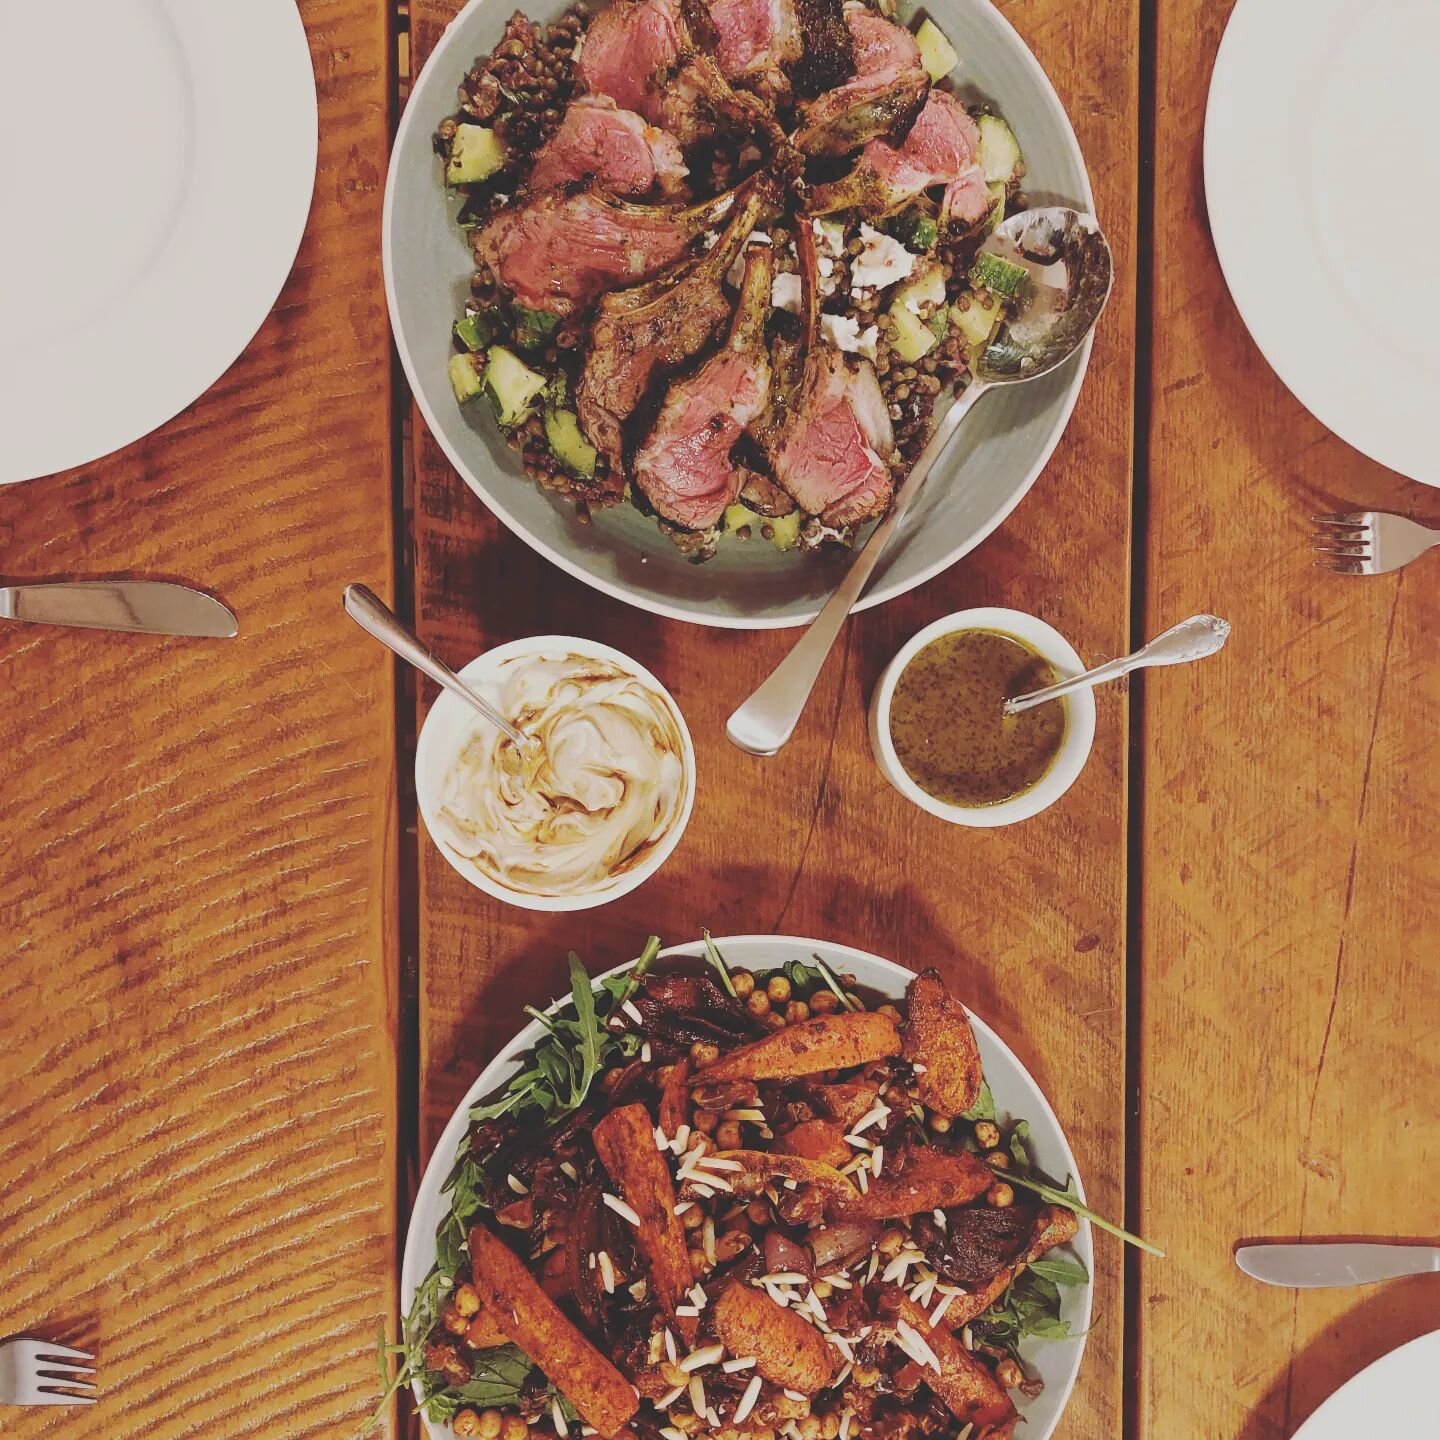 Wet windy winter nights call for scrumptious feasts I reckon, recipe testing went deliciously tonight! Thanks to my mum for being my sous chef, she's a legend! 

#nzlamb #lambrack #puylentils #moroccancarrots #recipetesting #winterwedding